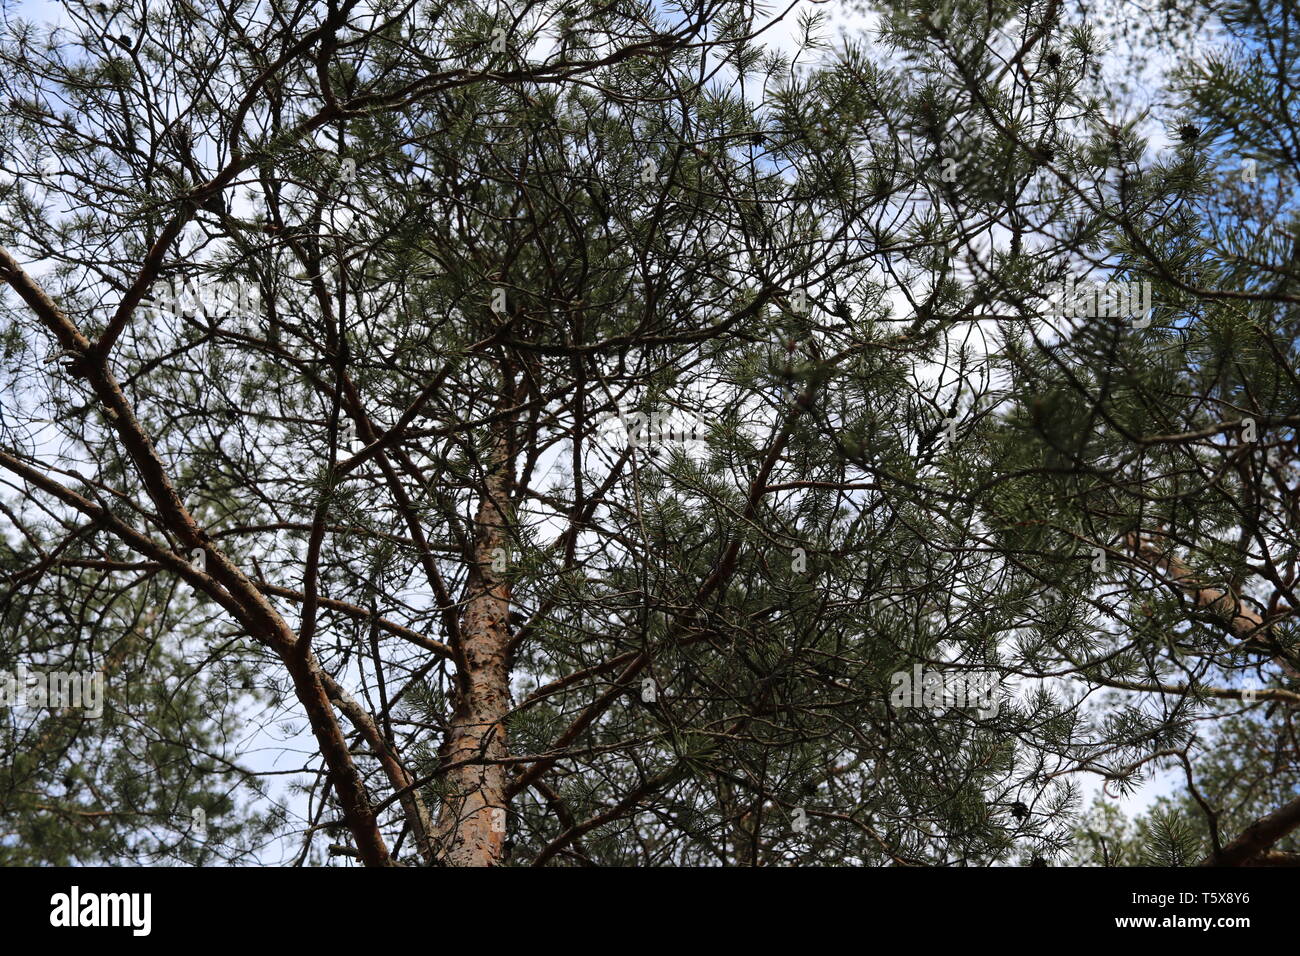 Cloudy sky view from below through a dense pine tree. Stock Photo